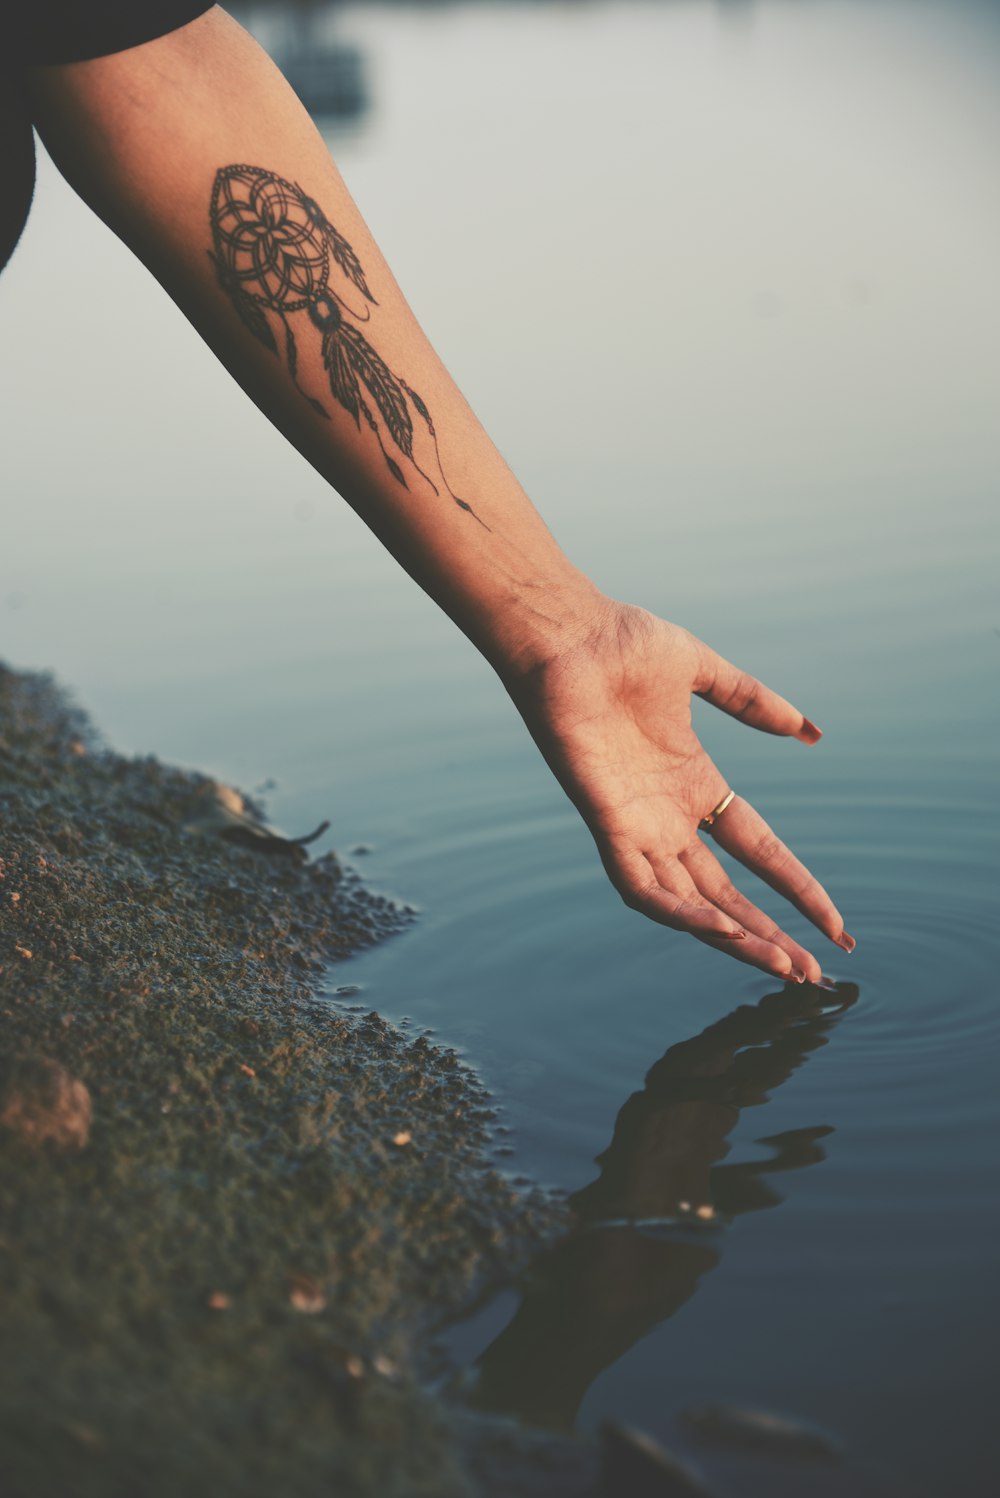 person hand reaching calm water with dreamcatcher tattoo